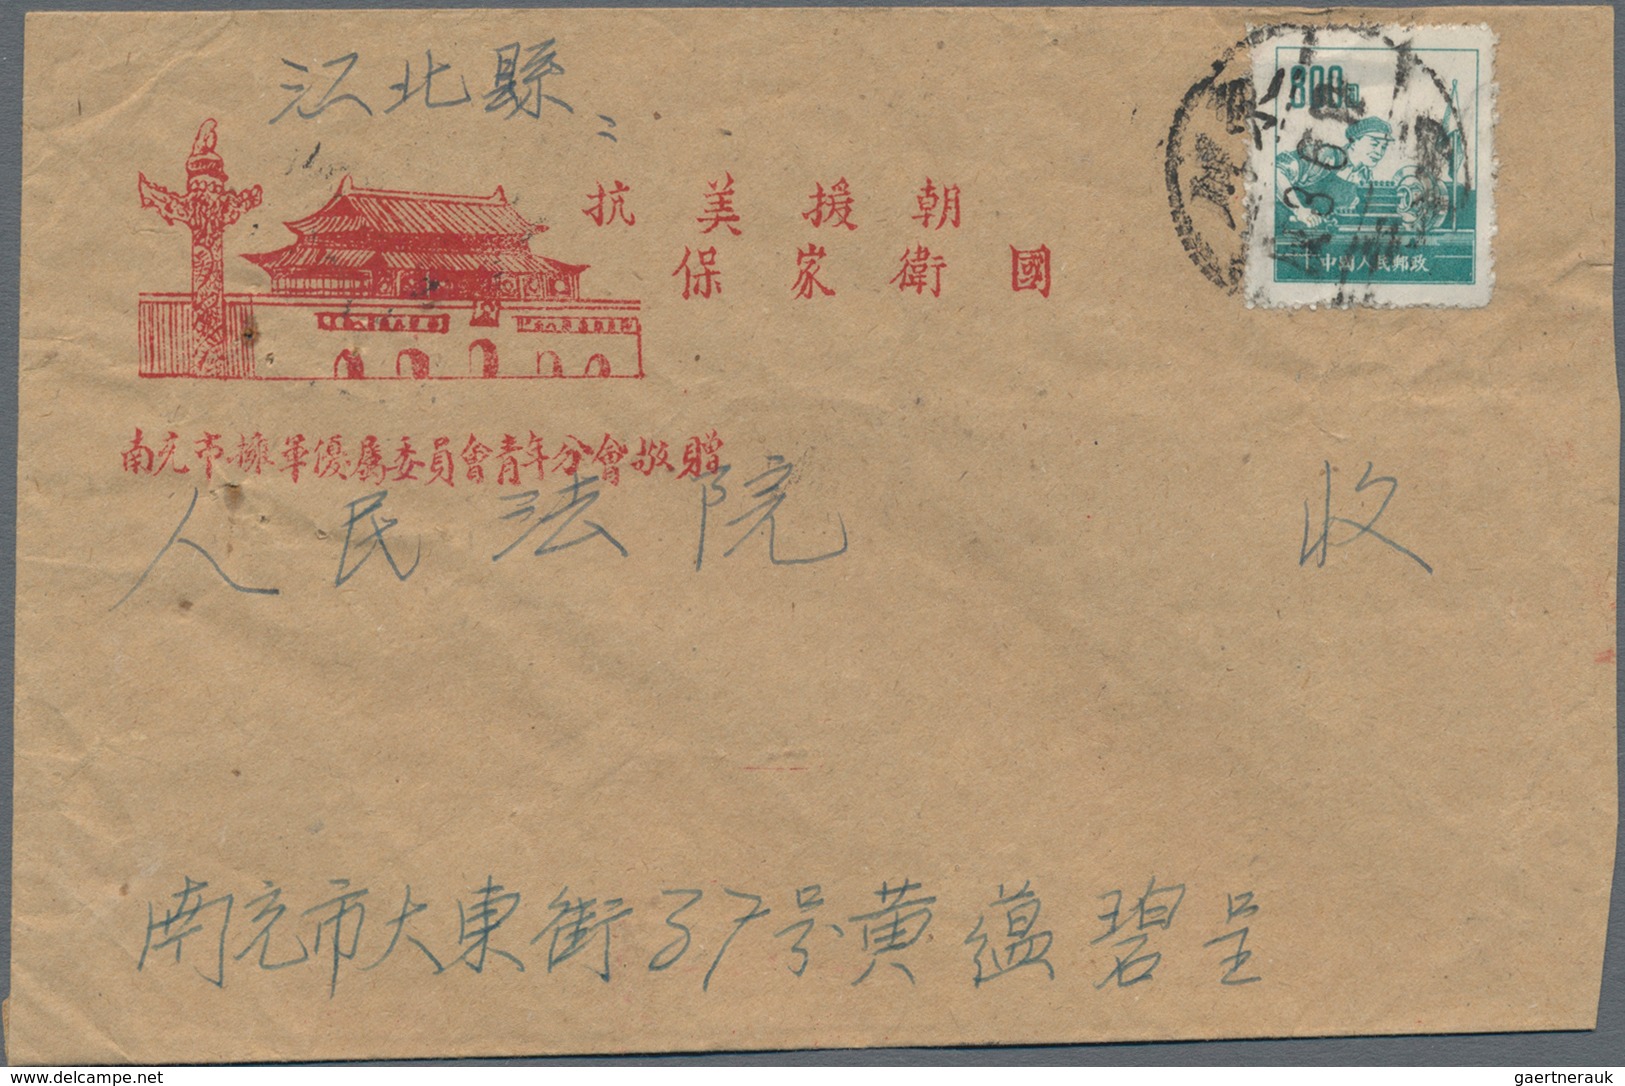 China - Volksrepublik: 1949/54 (ca.), approx. 41 commercial covers bearing the first issues (mostly